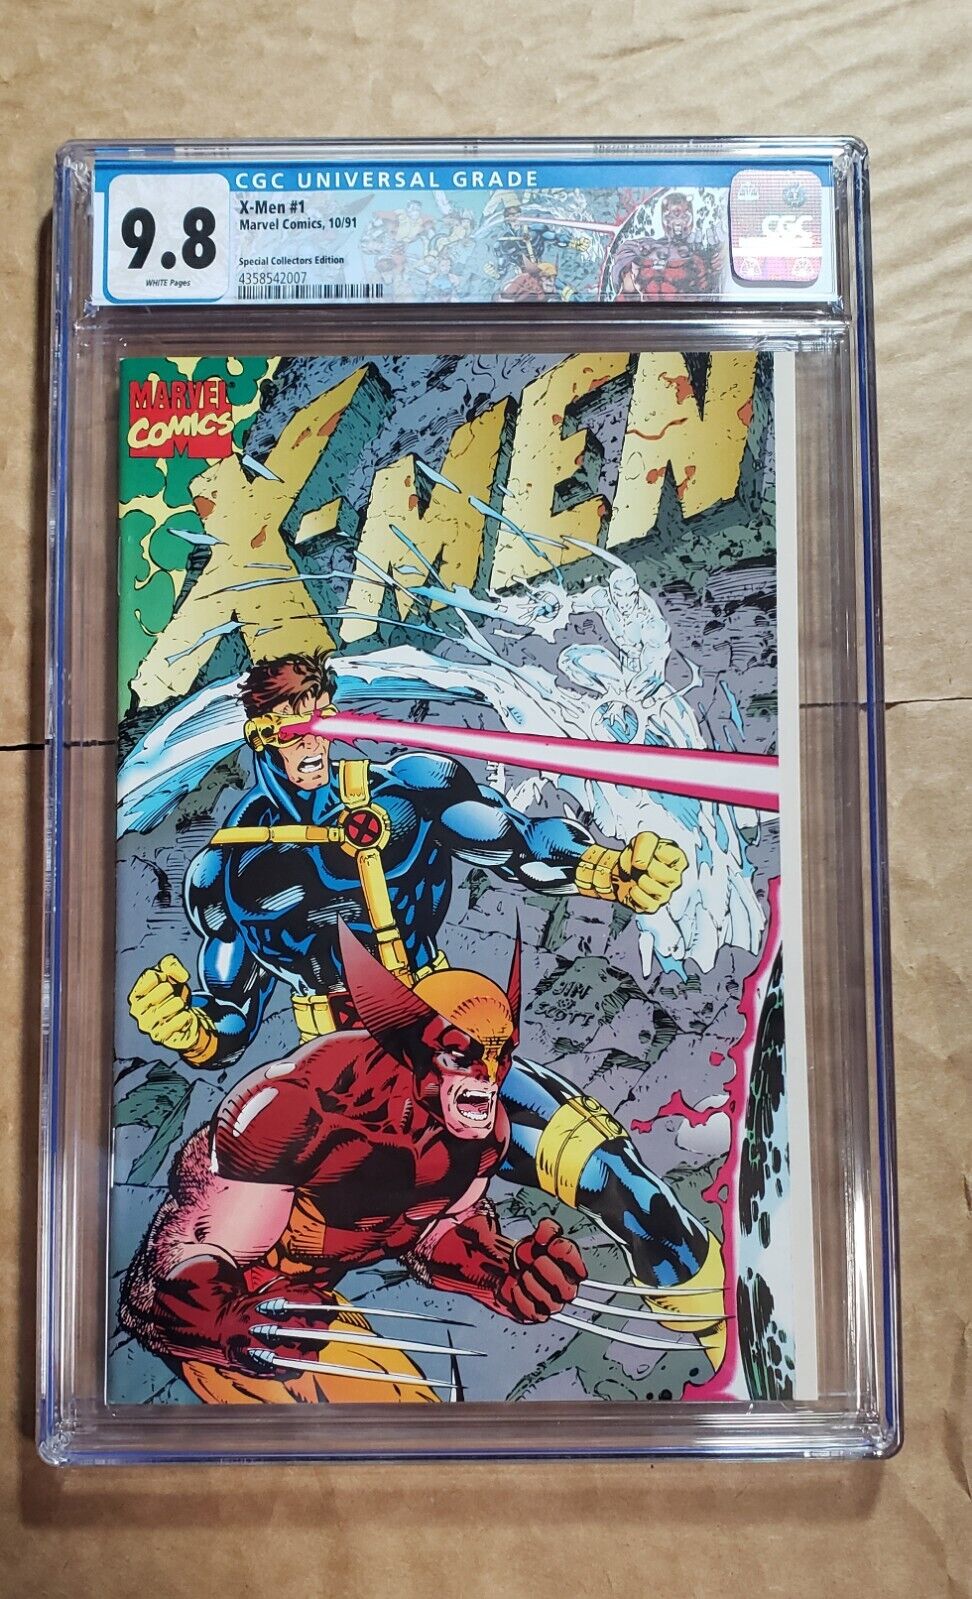 X-Men #1 CGC 9.8 Special Edition with Custom Label, Jim Lee Marvel 10/91 